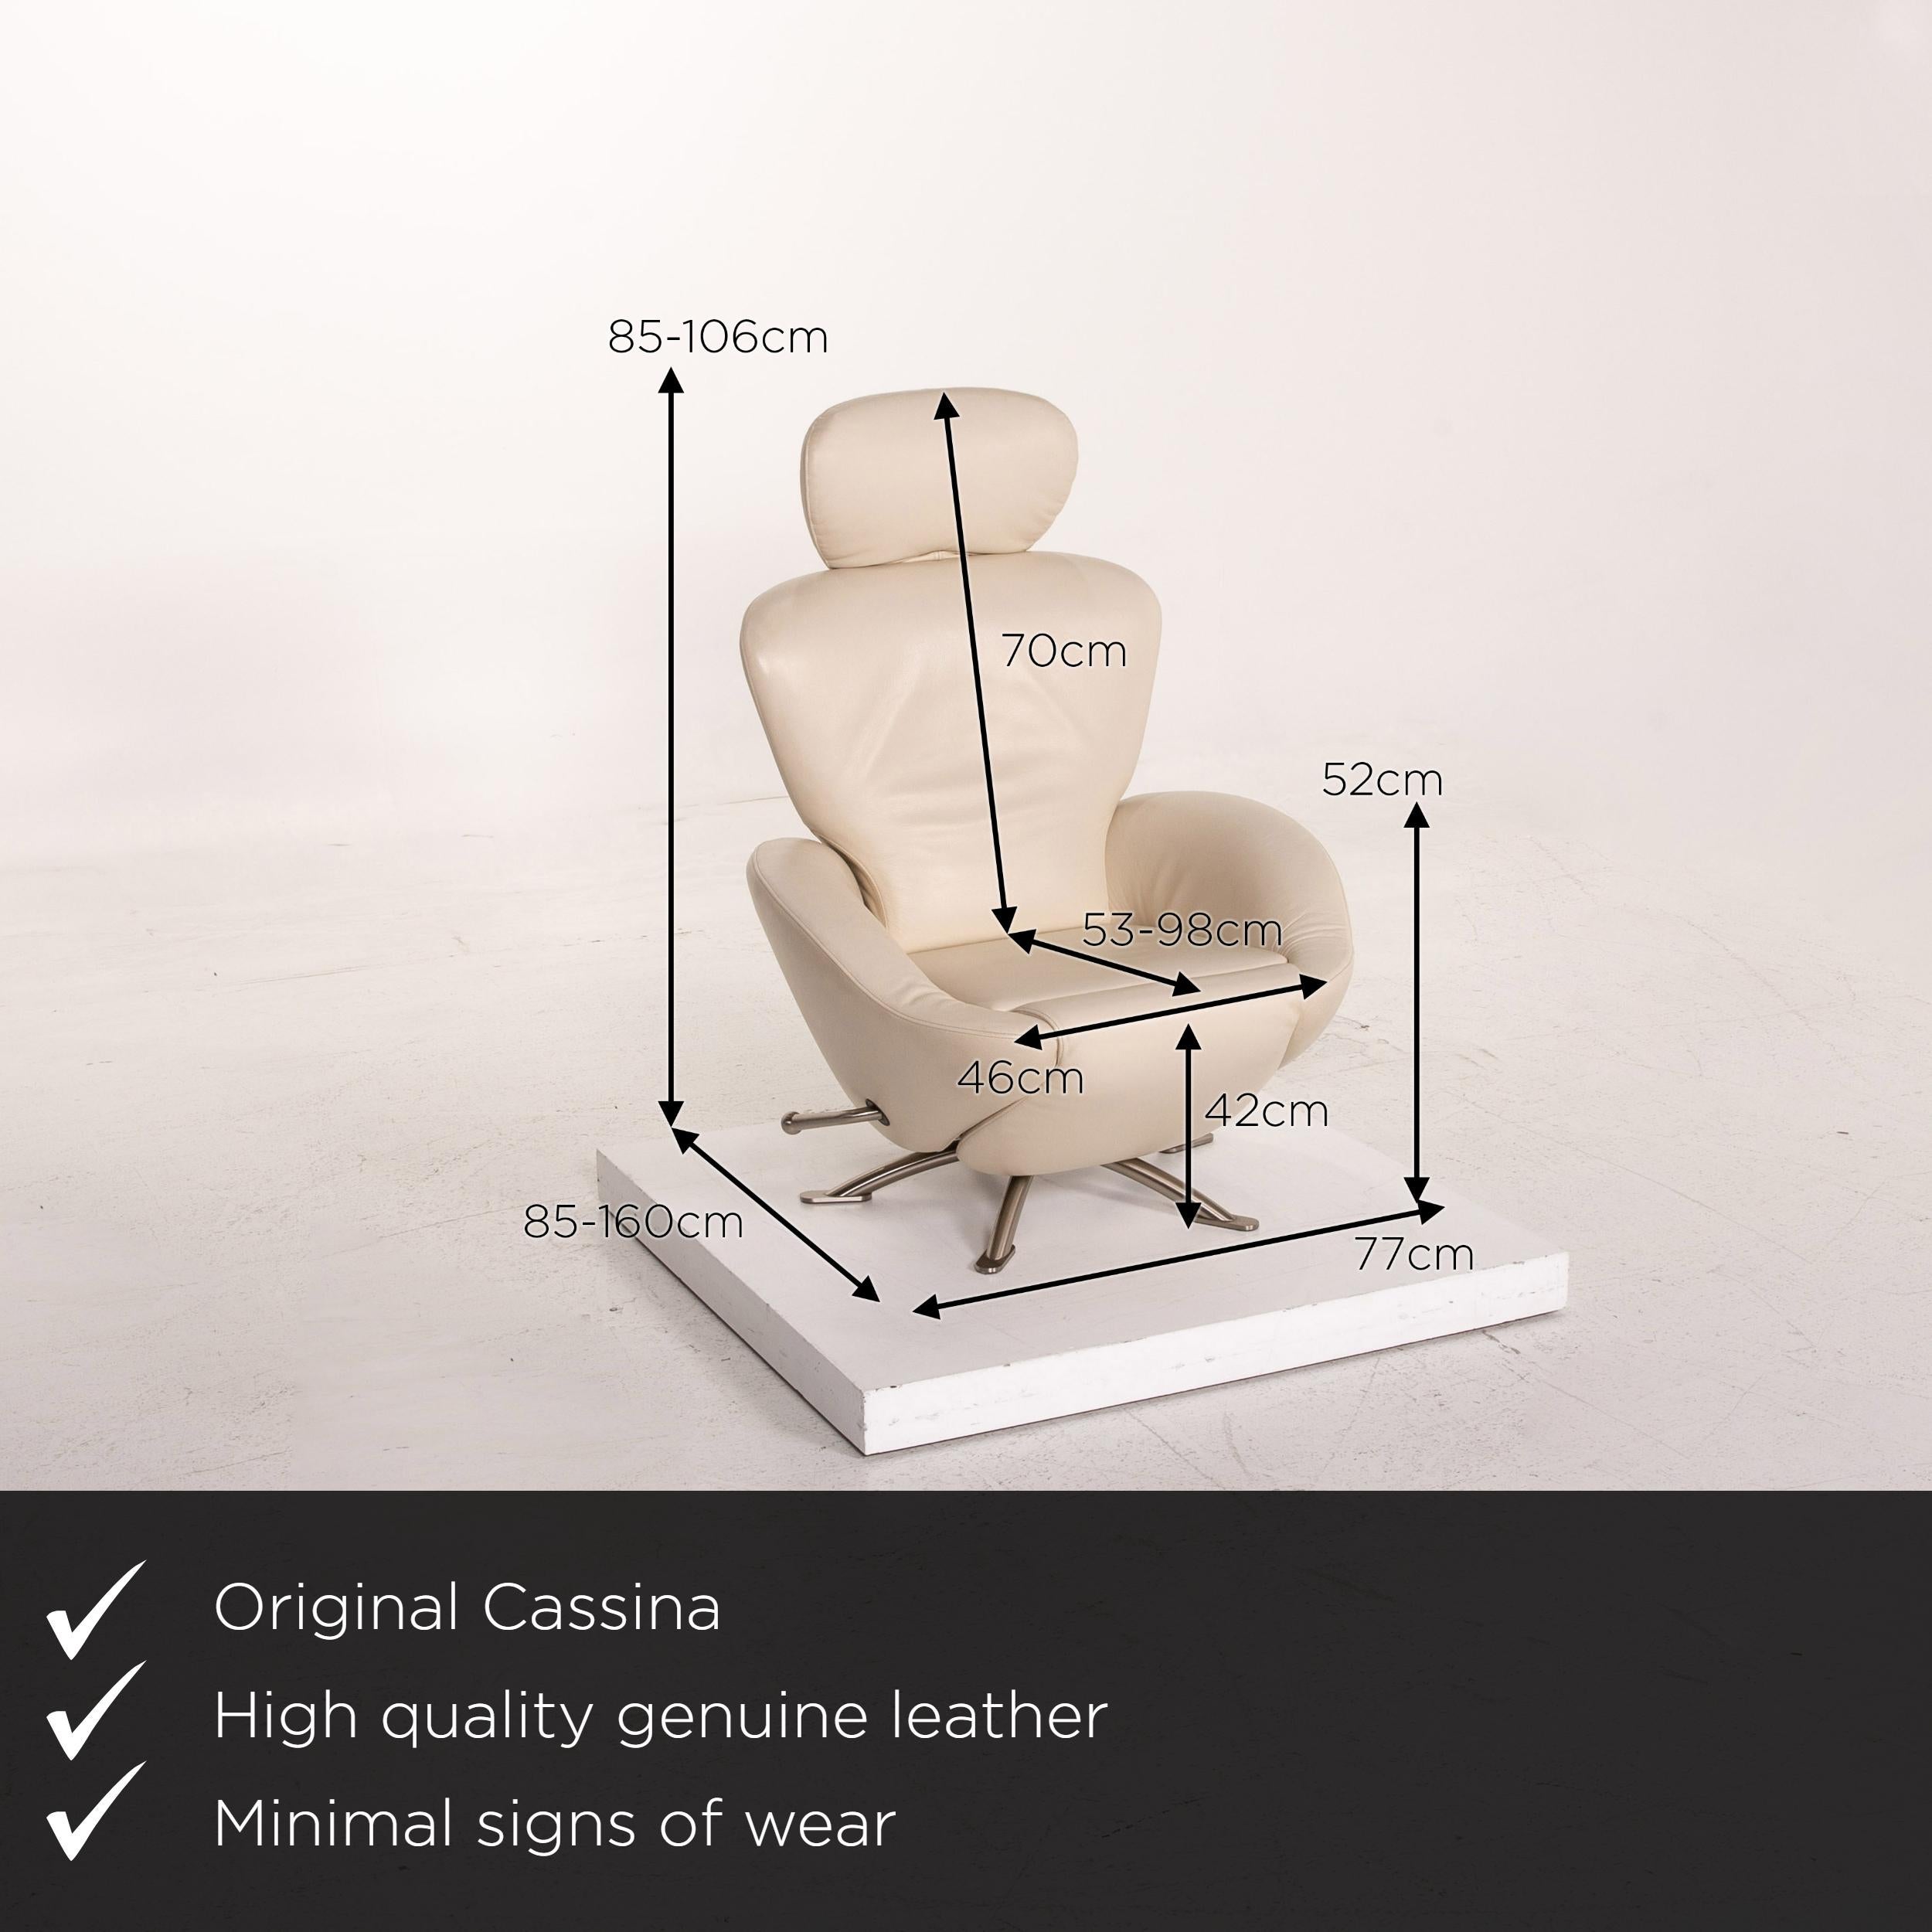 We present to you a Cassina Dodo leather armchair cream relax function function relax armchair.
 

 Product measurements in centimeters:
 

Depth 85
Width 77
Height 85
Seat height 42
Rest height 52
Seat depth 53
Seat width 46
Back